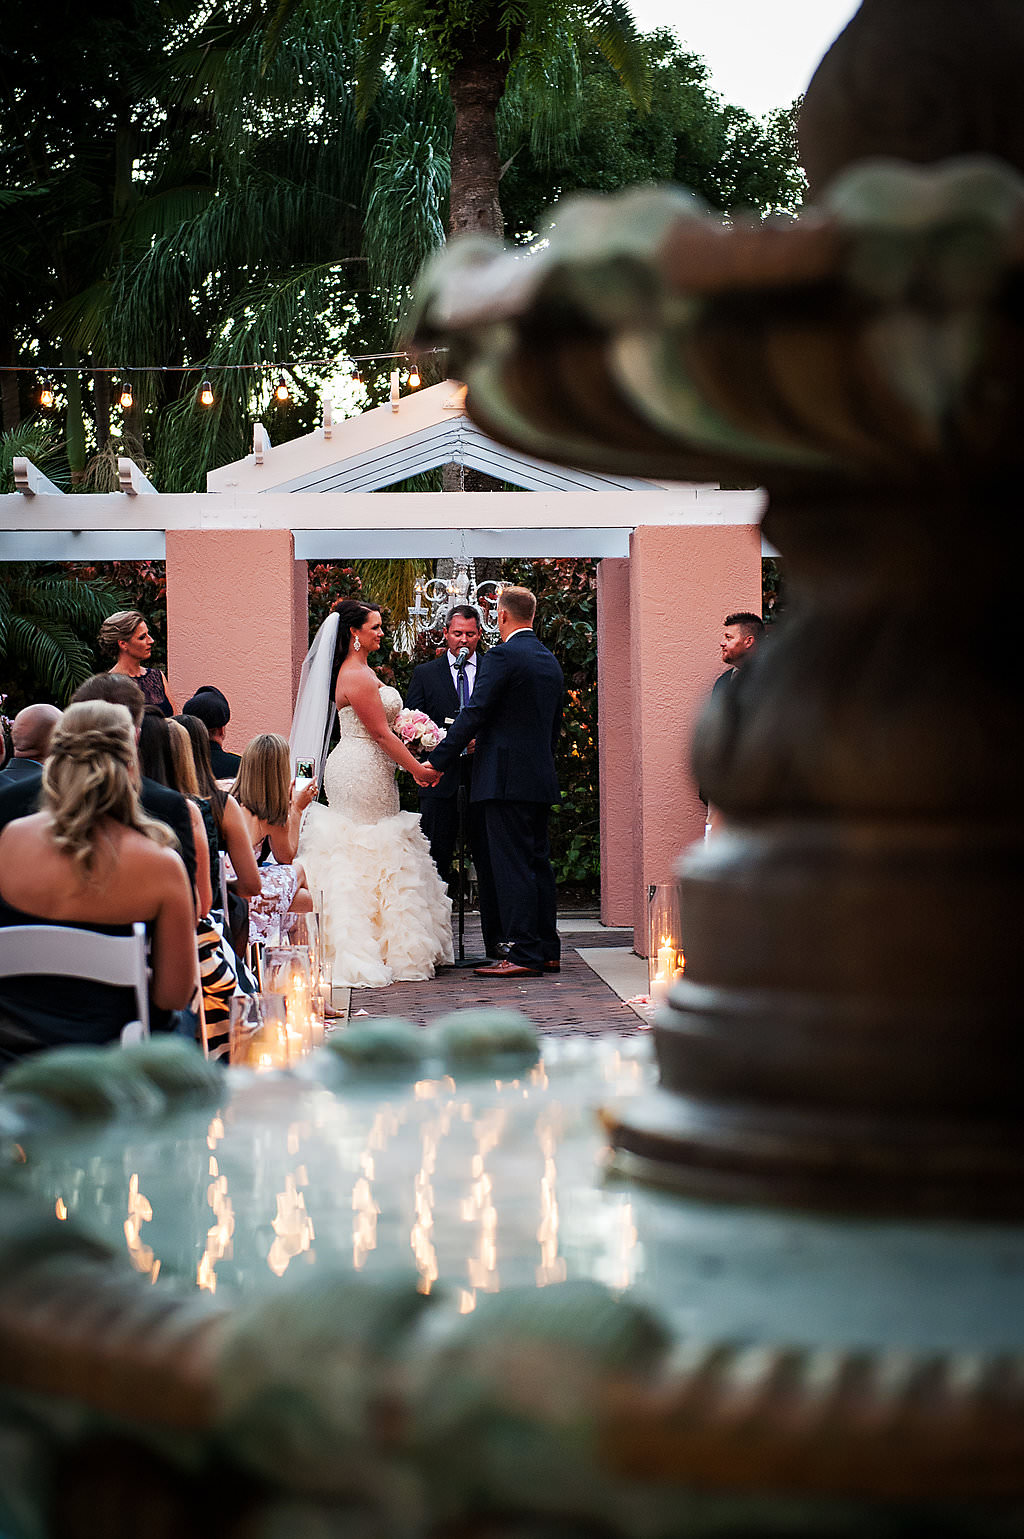 Outdoor Courtyard Wedding Ceremony Portrait with Pink Rose Petals | St Pete Wedding Photographer Limelight Photography | Tampa Bay Wedding Venue Vinoy Renaissance